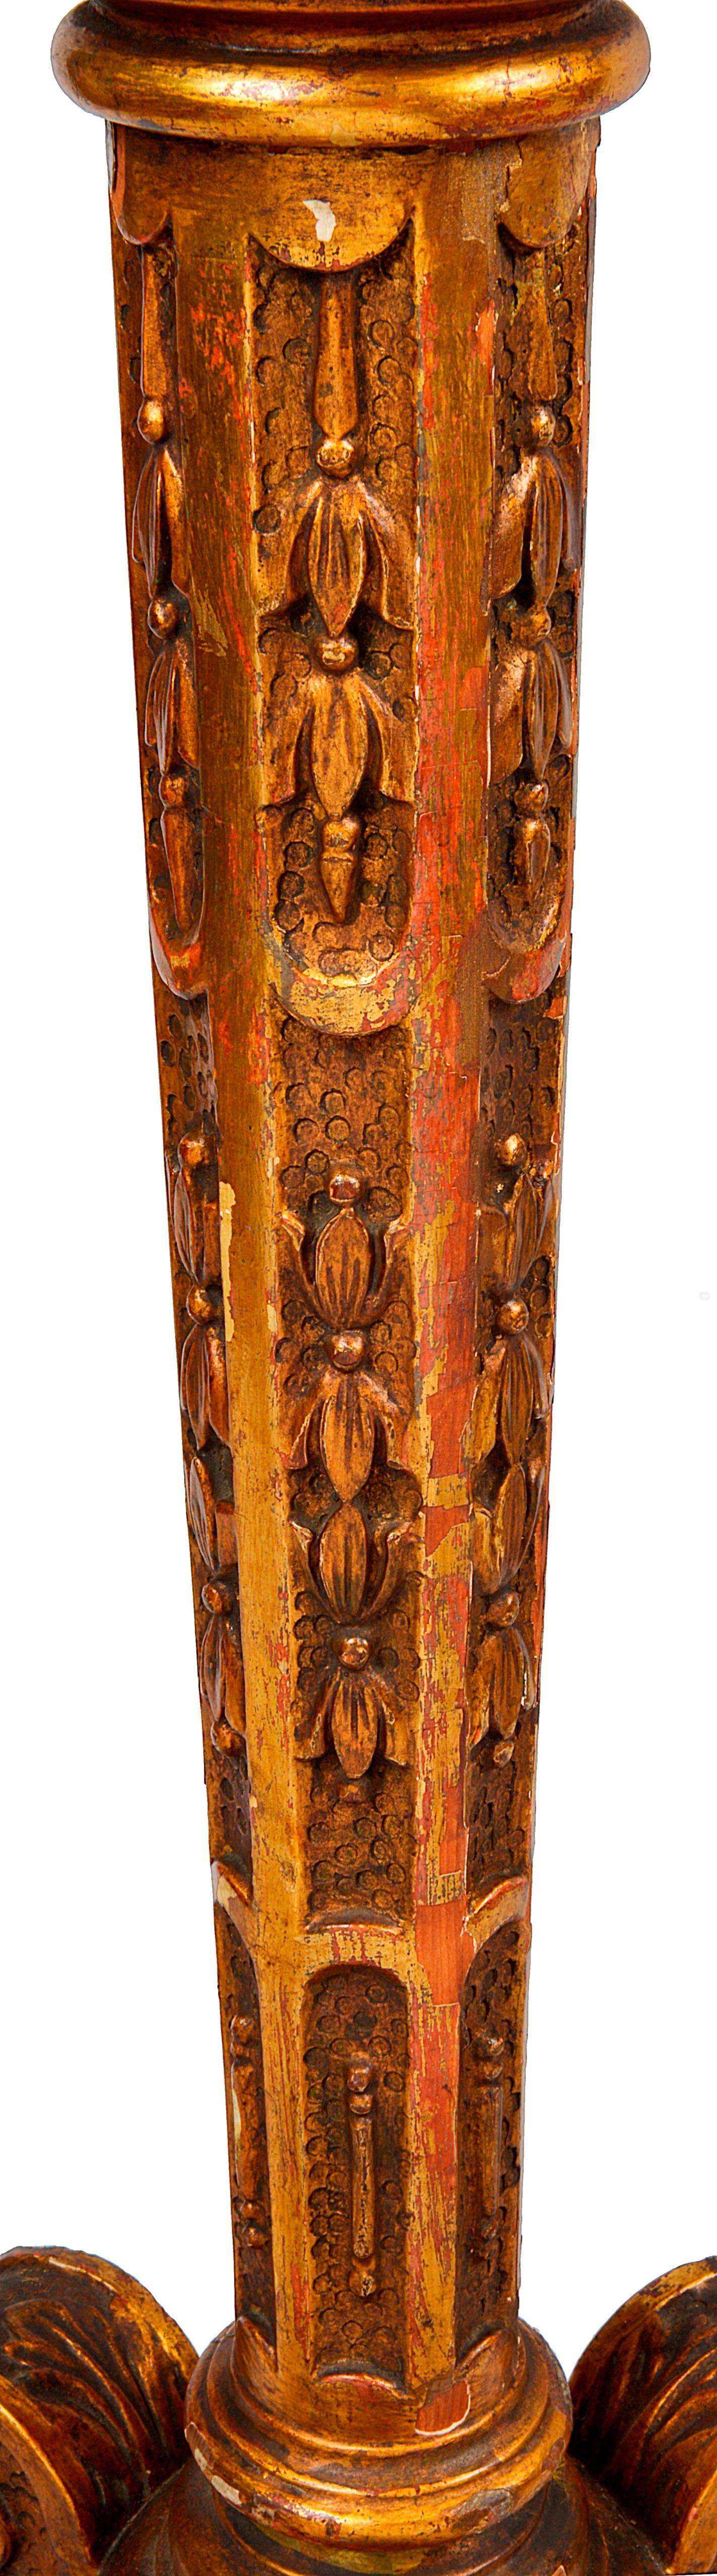 English Pair of Carved Gilded Torchas, 19th Century